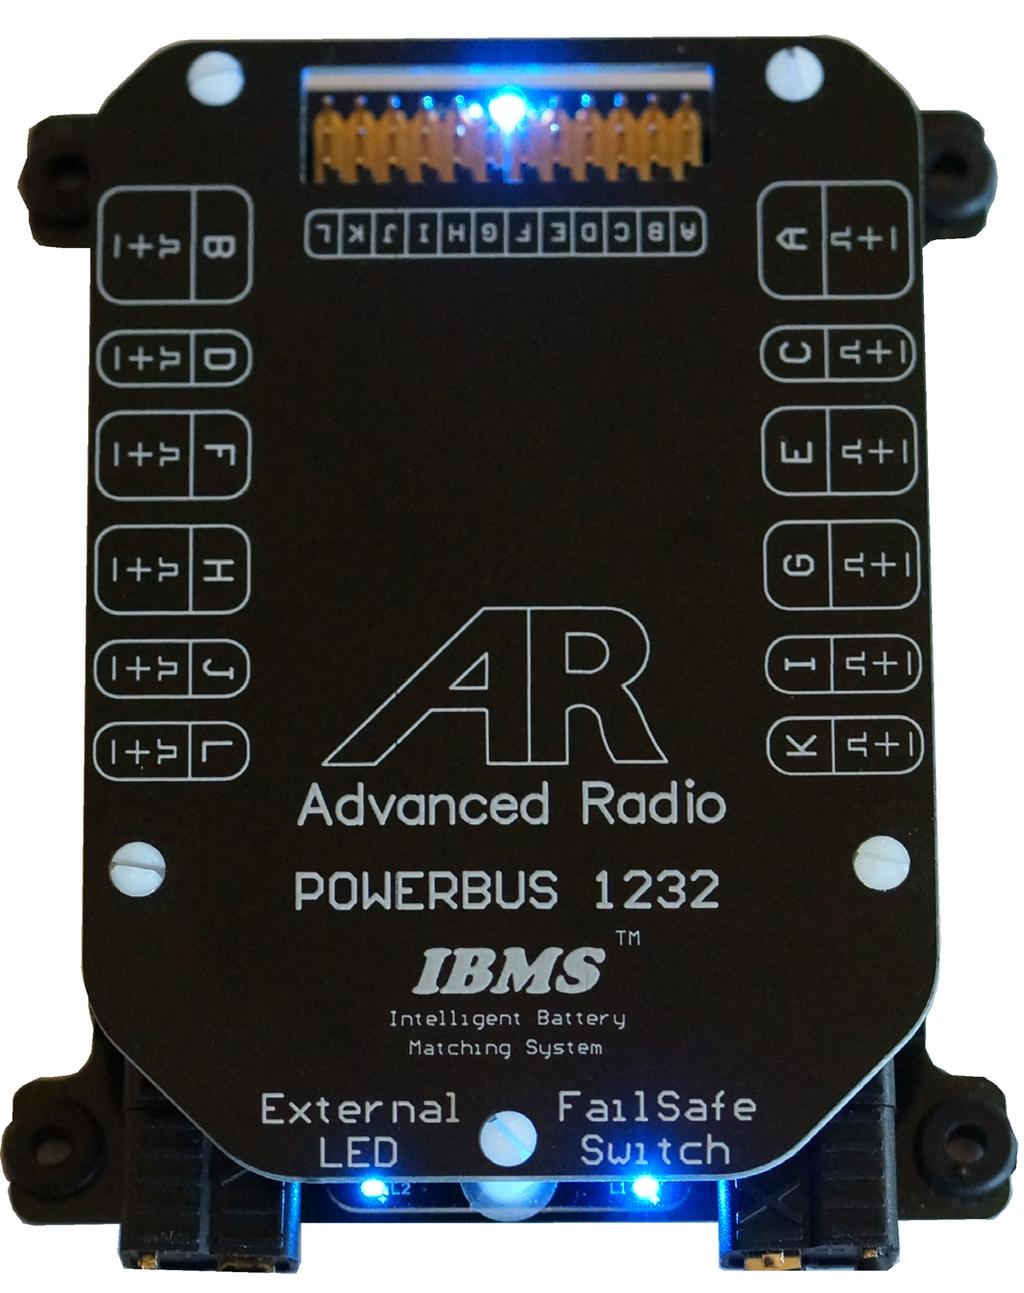 Power Bus 1232 Intelligent Battery Management System LED indication that the 5volt regulator is supplying power to the 12 receiver